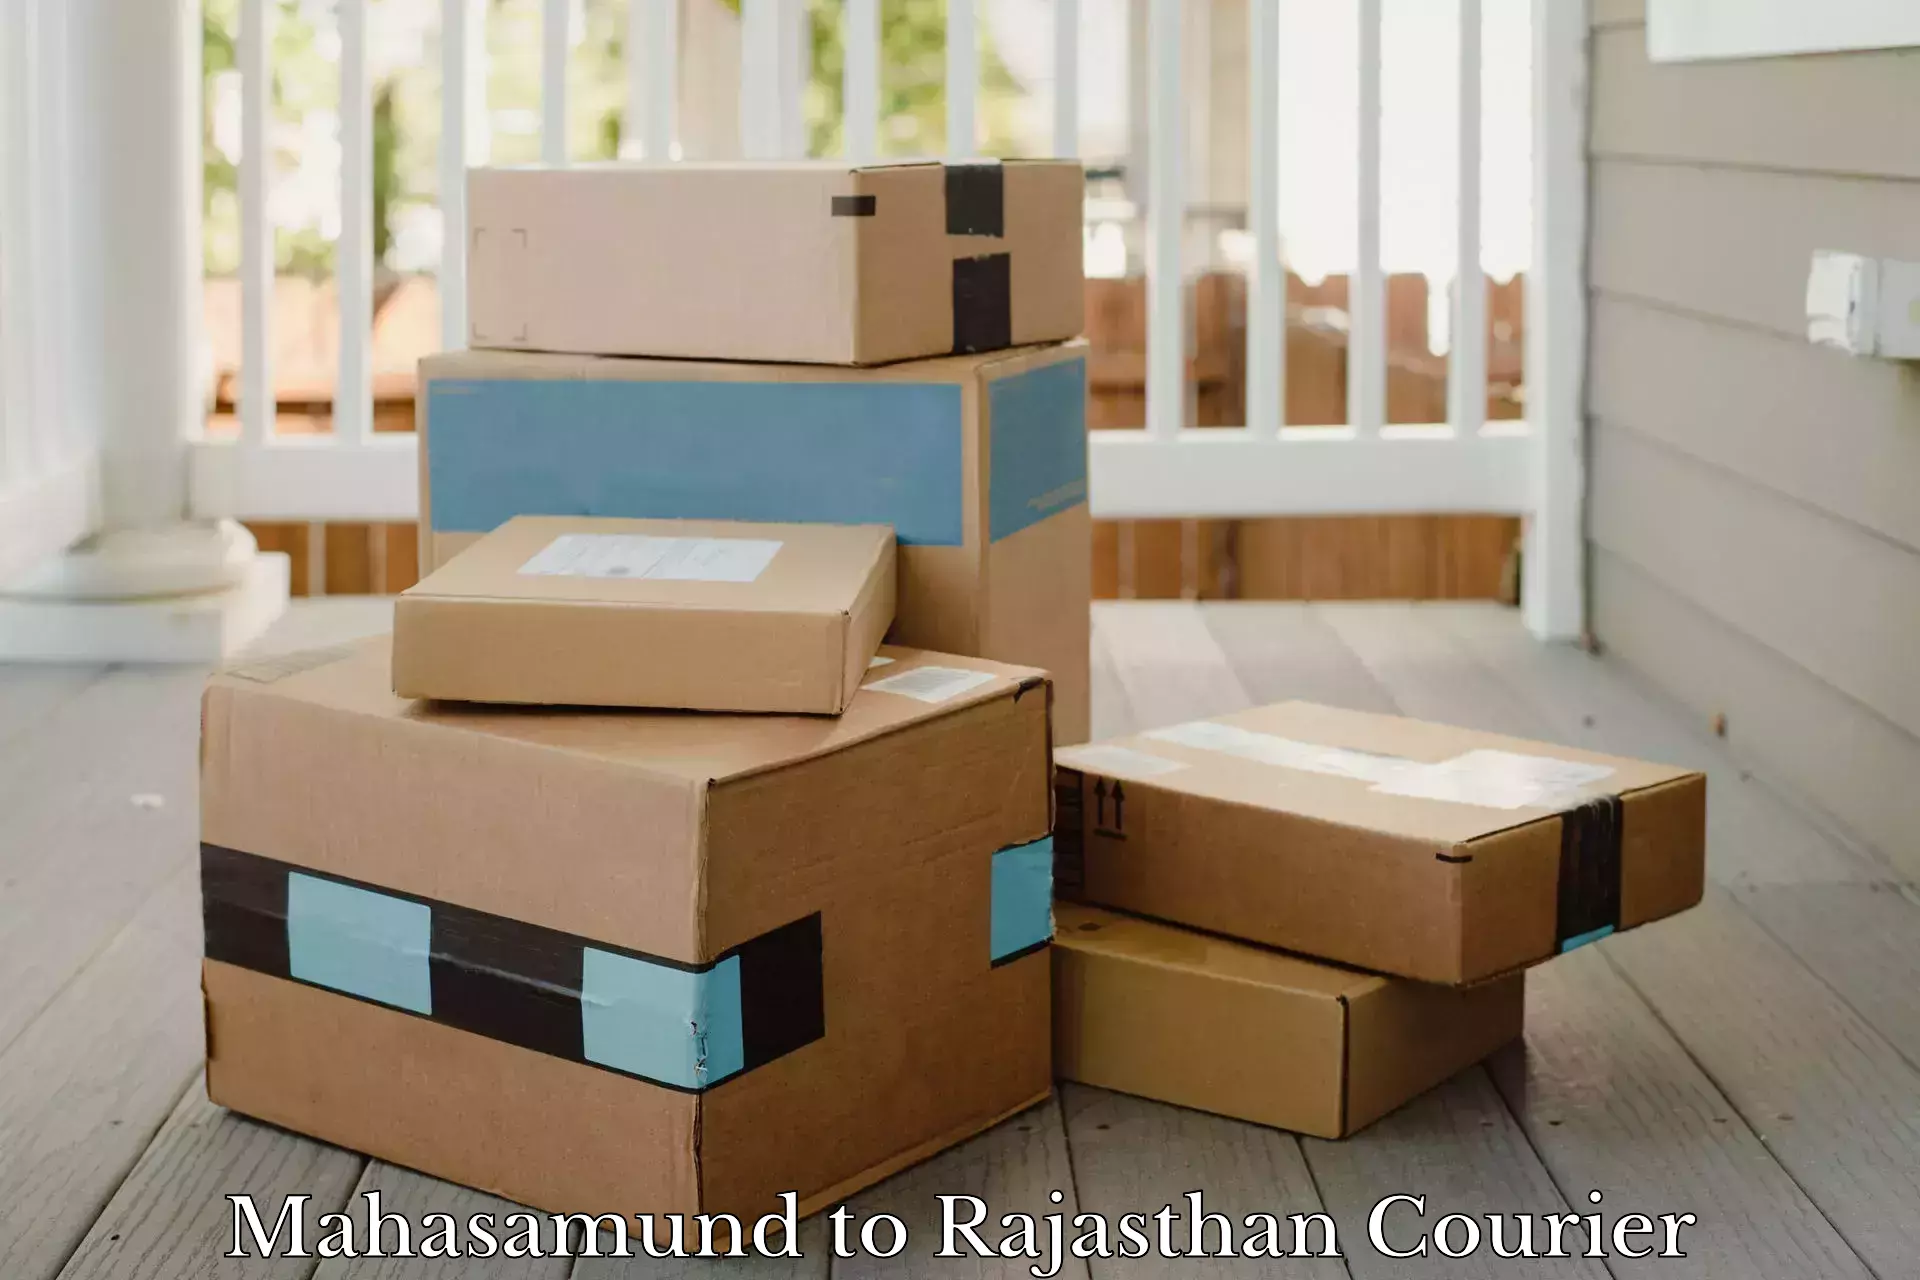 Full-service courier options in Mahasamund to Rajasthan